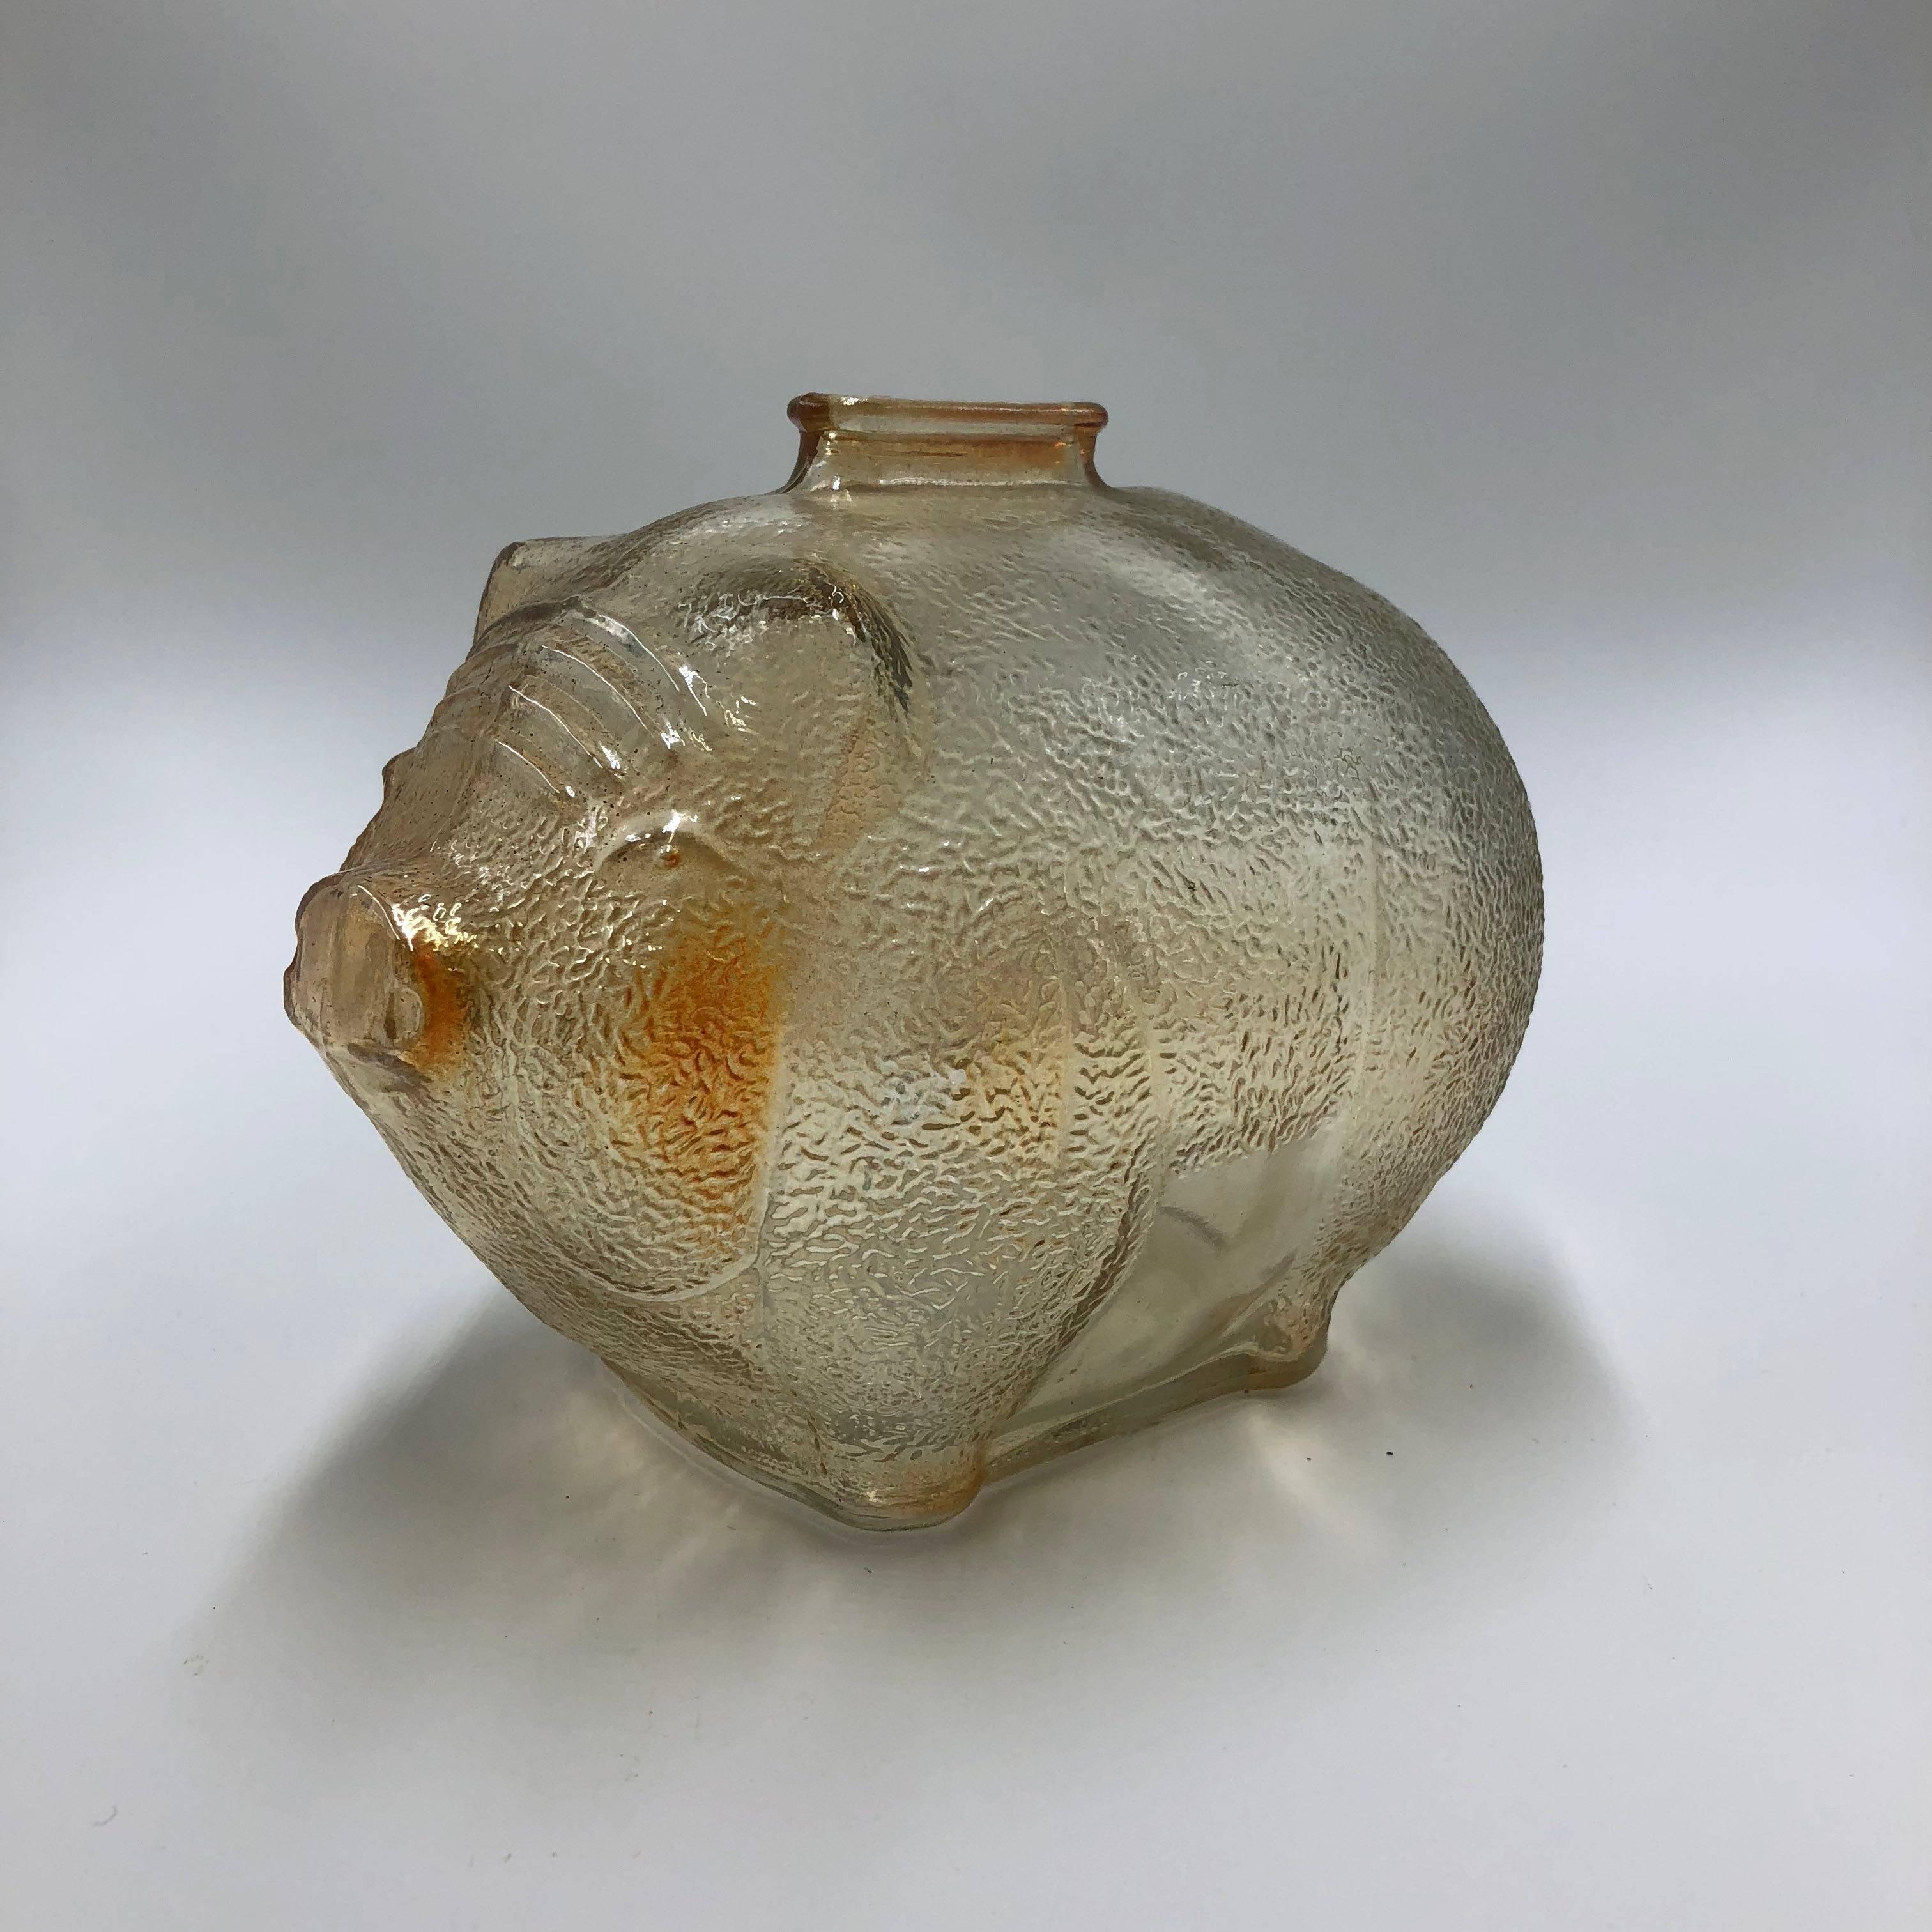 Vintage marigold iridescent glass piggy bank in good condition, a little over 10 cm long end to end.

Anchor Hocking piggybank. 